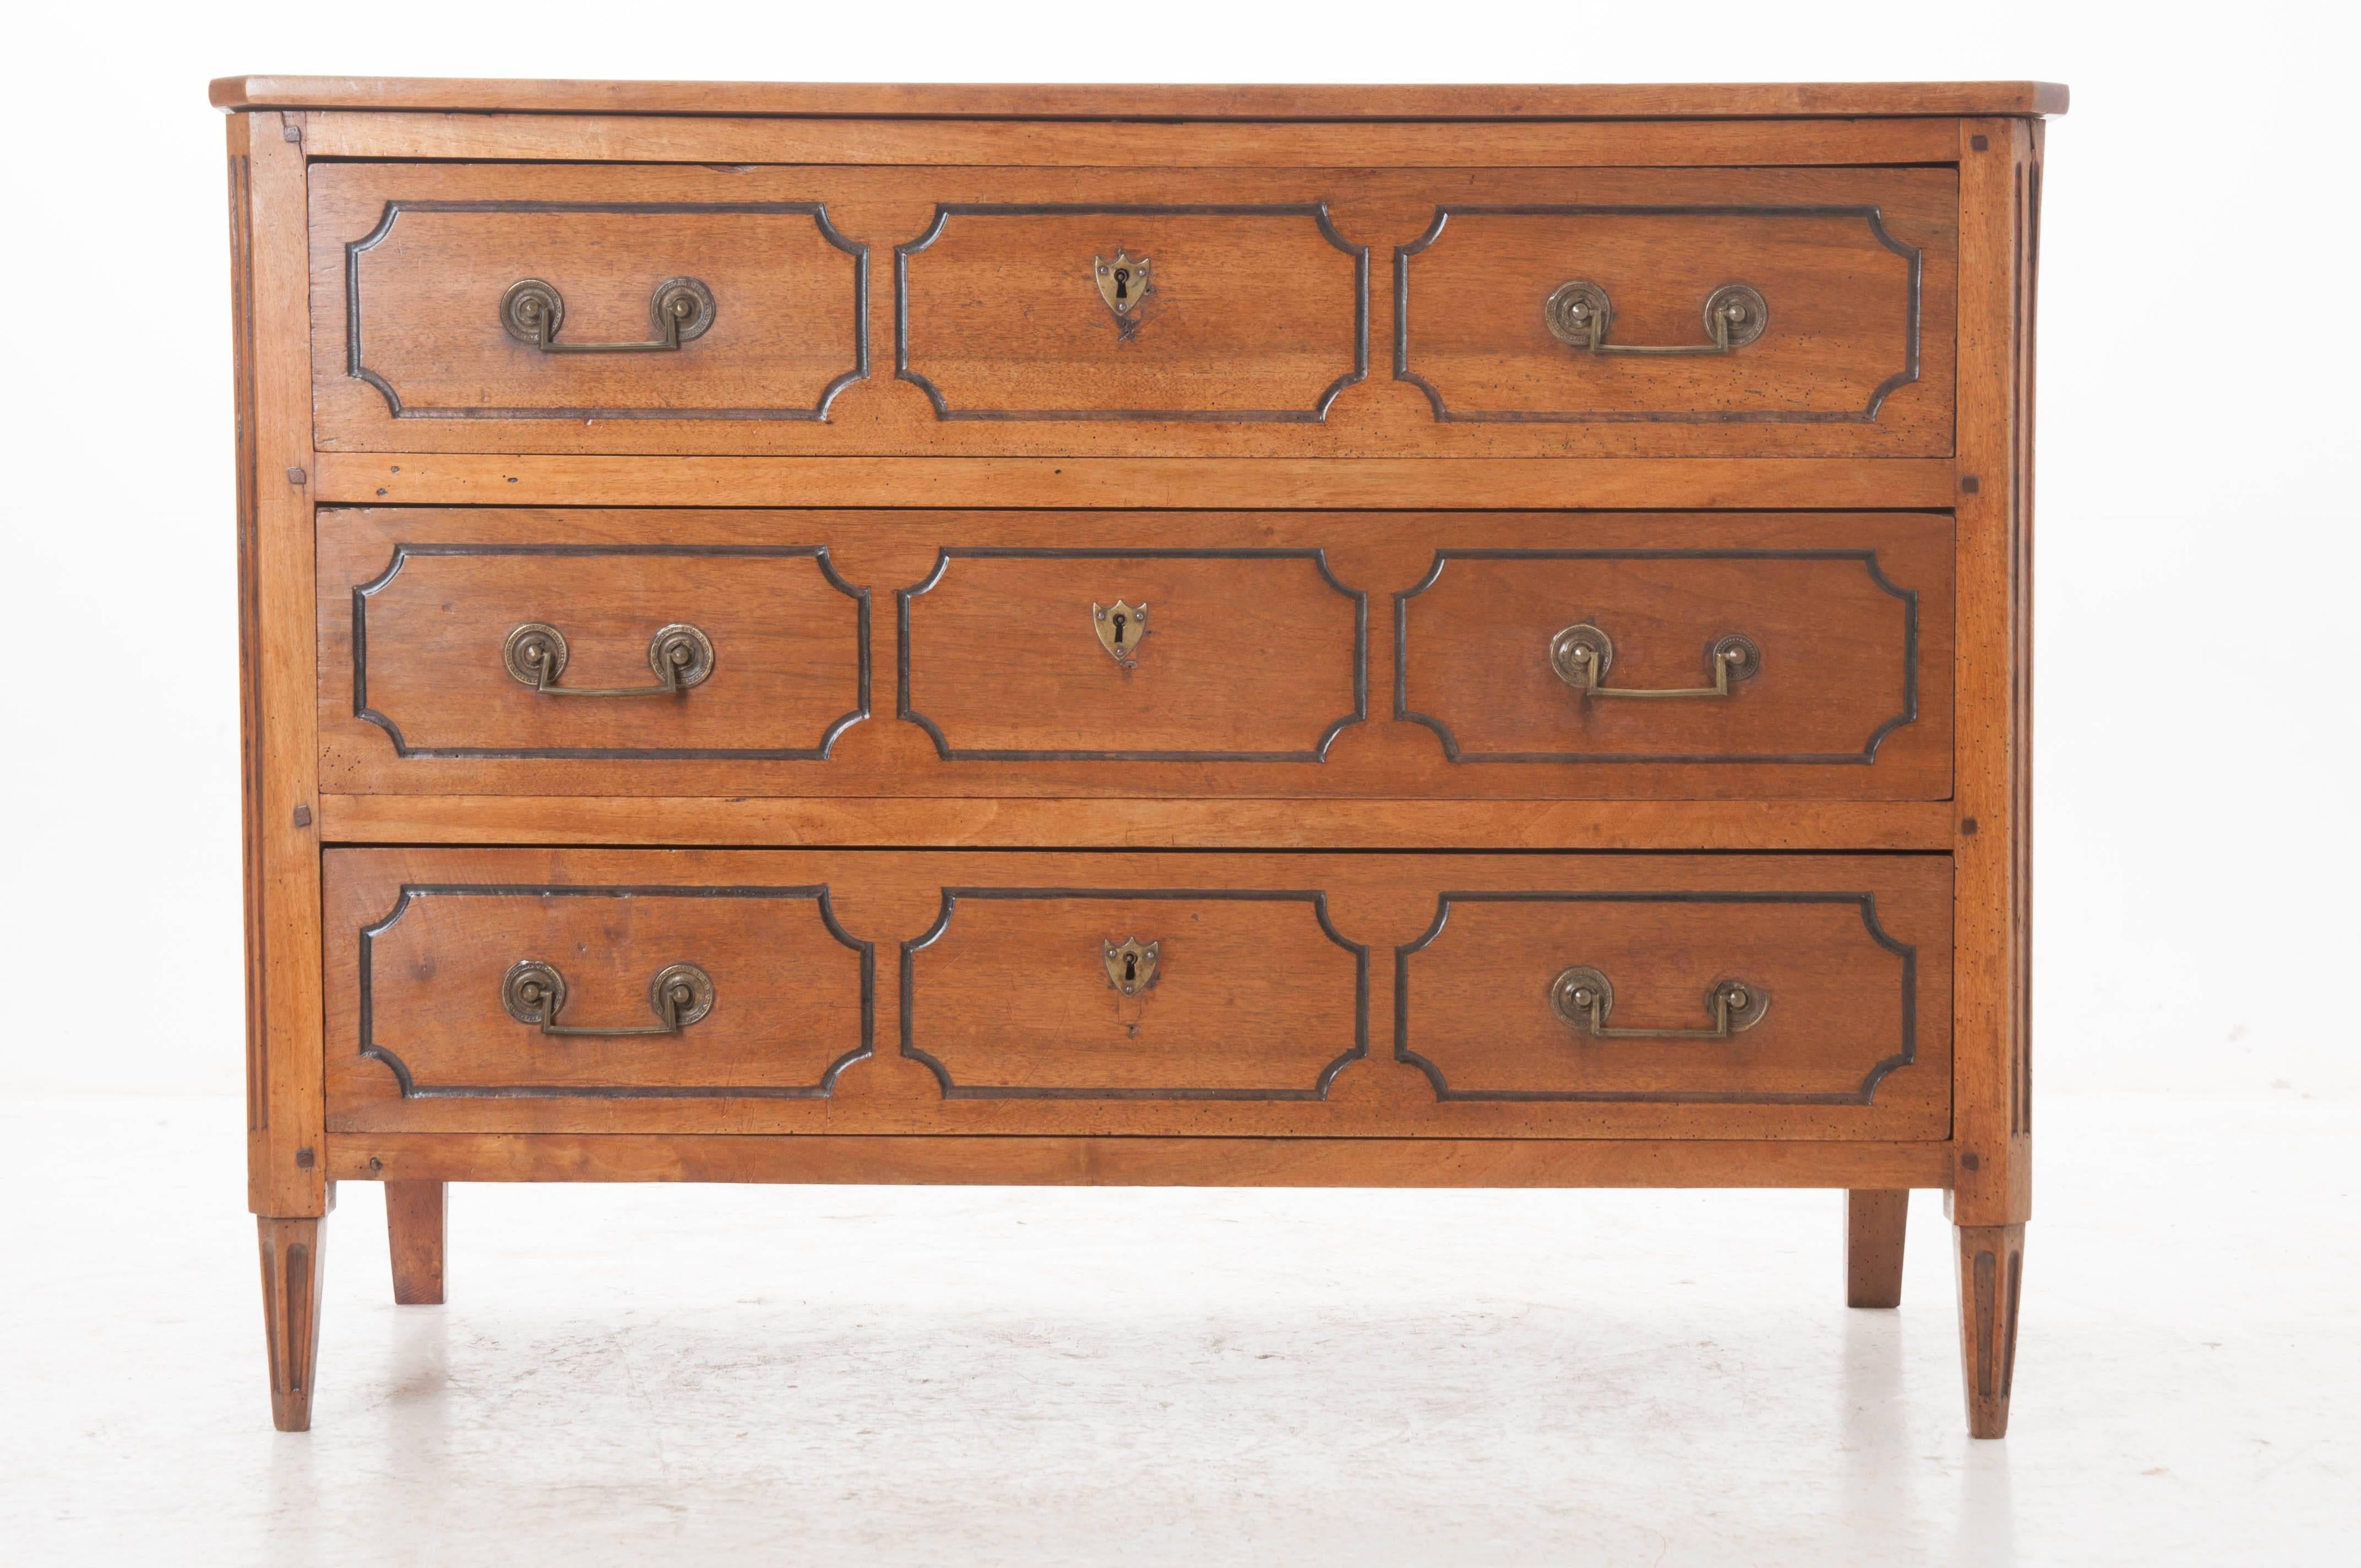 An impressive 19th century three-drawer walnut Directoire commode from France. Constructed using solid wood and peg and hole techniques, this piece has a restrained design, reflective of the Directoire style. The three drawers have shaped, ebony